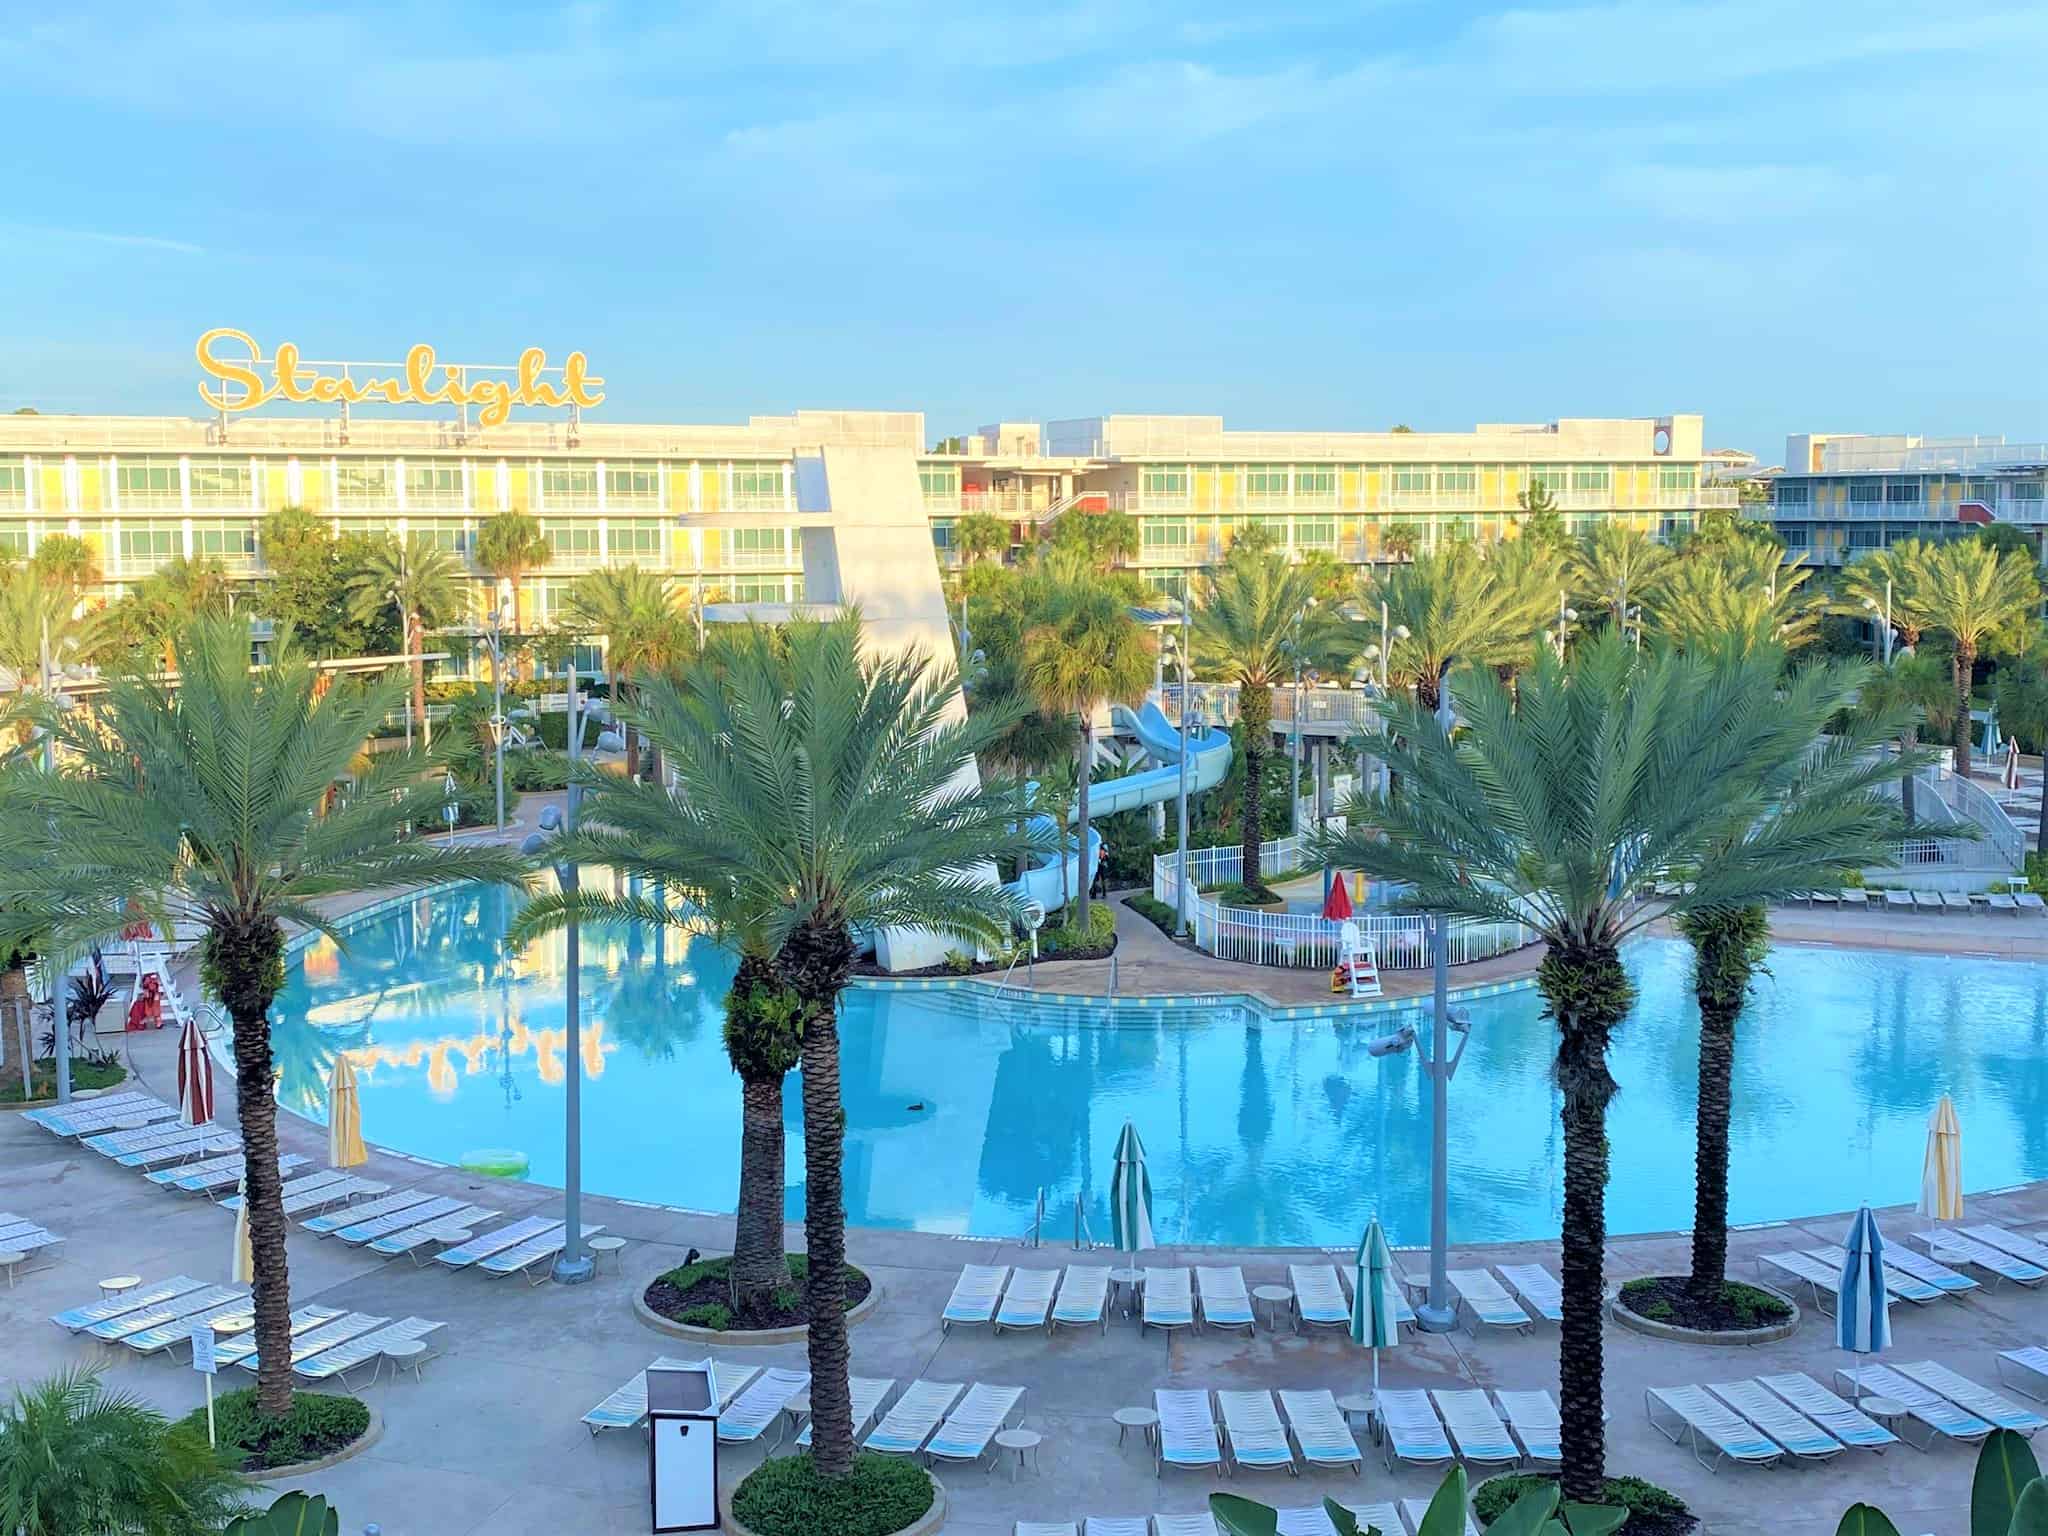 Universal Cabana Beach Resort Pool is surrounded by the hotel buildings and features palms trees, plenty of lounge chairs, and a curving waterslide